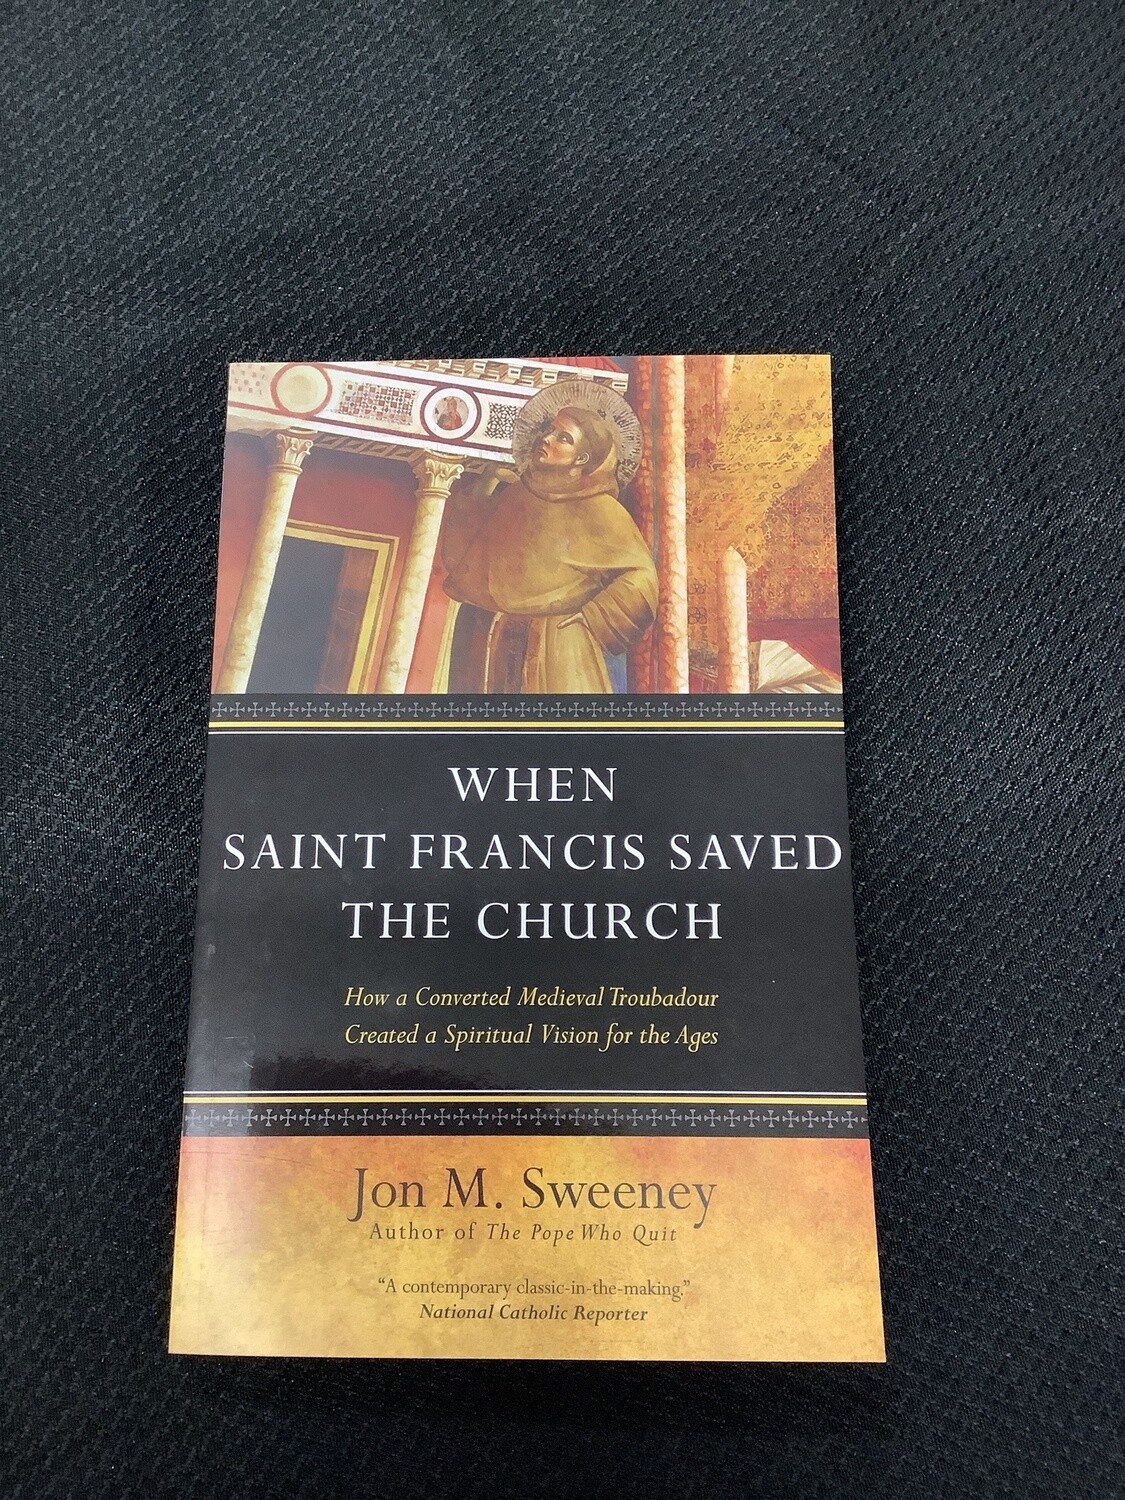 When Saint Francis Saved The Church How a Converted Medieval Troubadour Created a Spiritual Vision for the Ages - Jon M. Sweeney